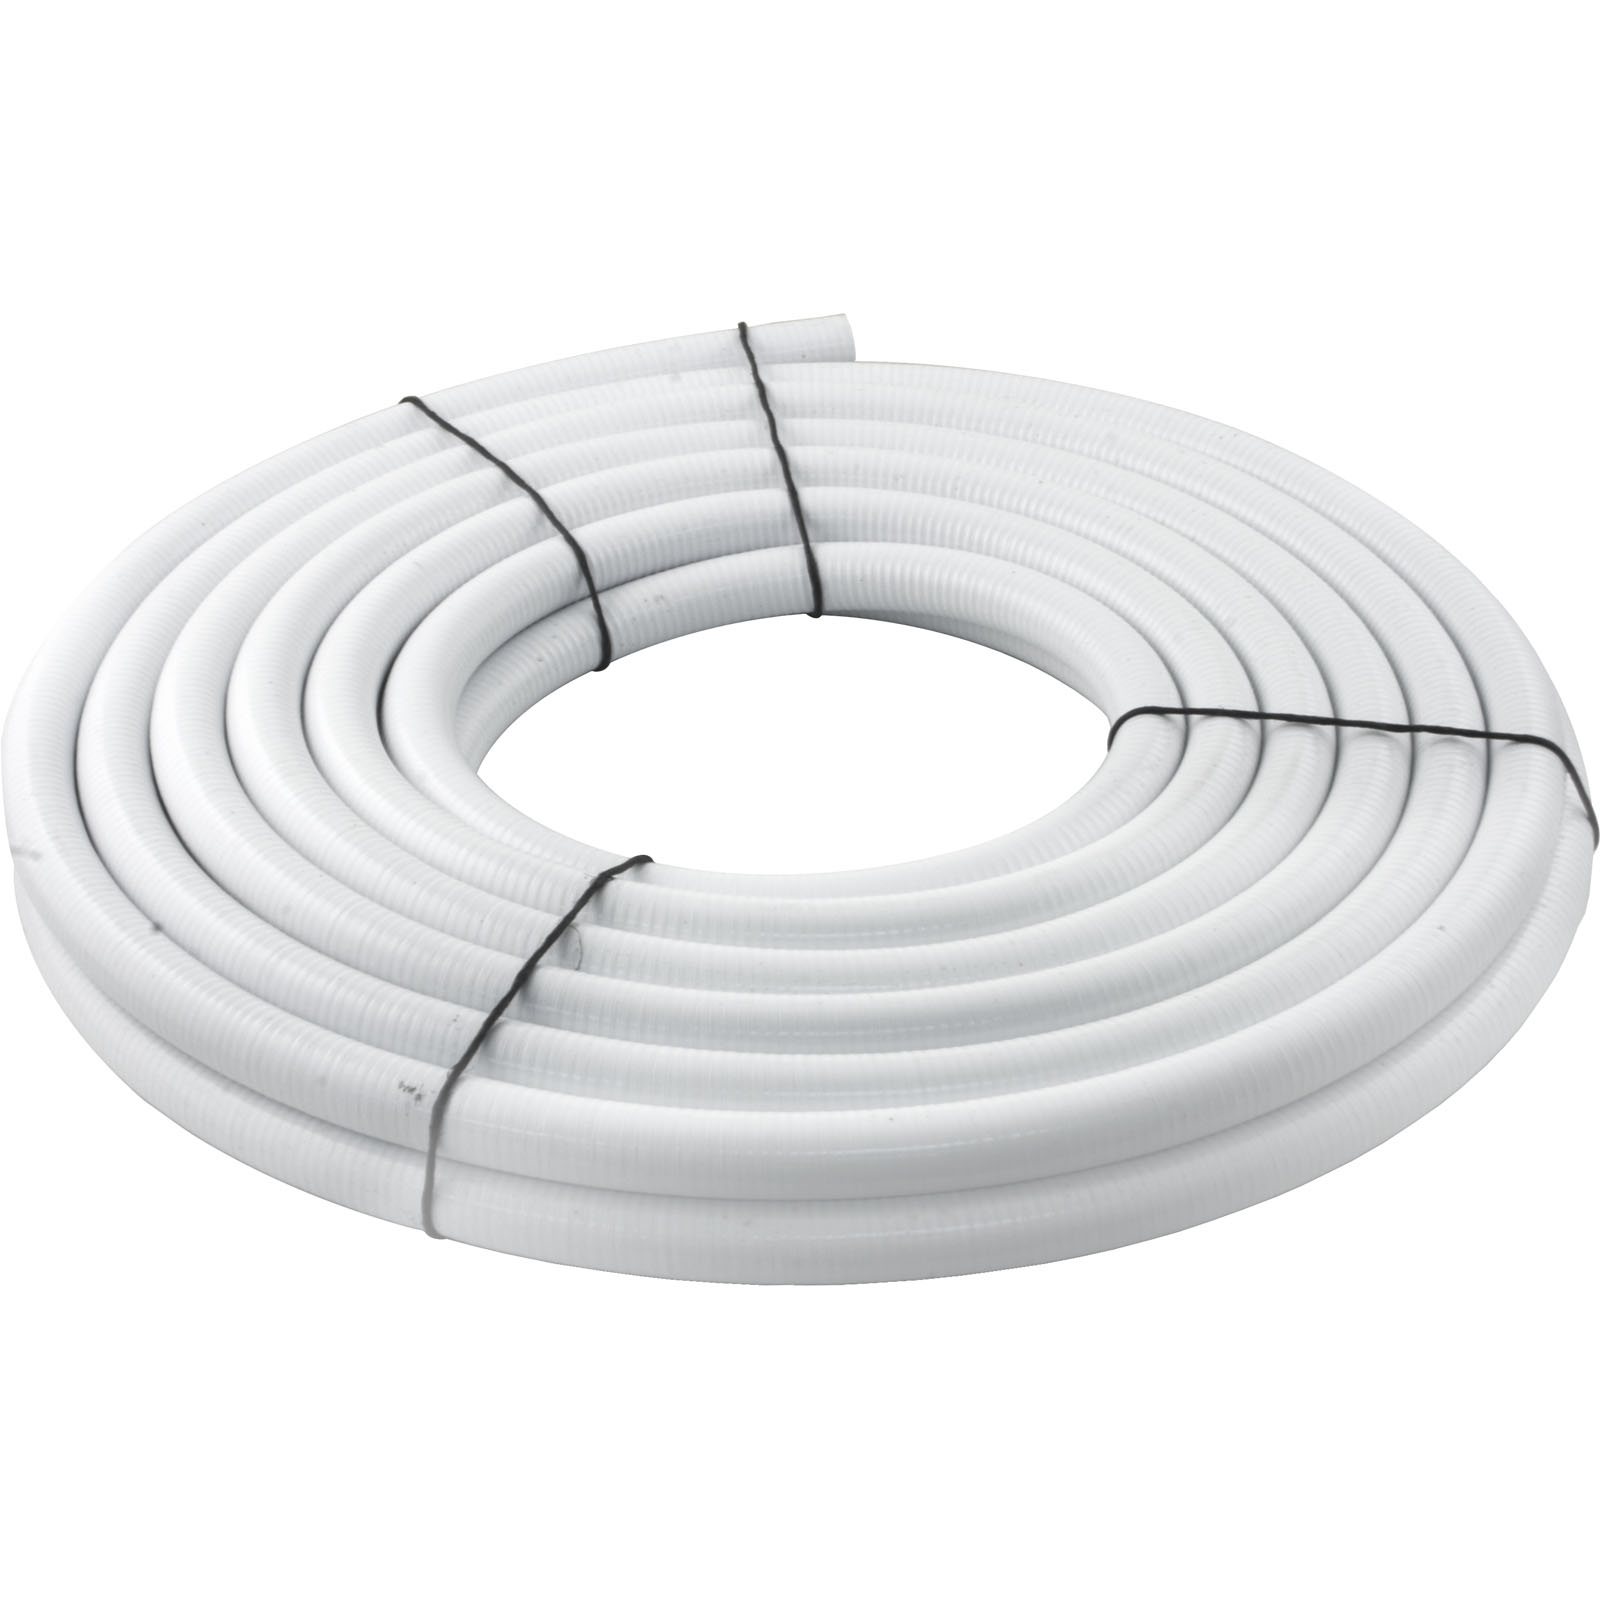 Picture of Flexible PVC Pipe, 1/2" x 50 foot